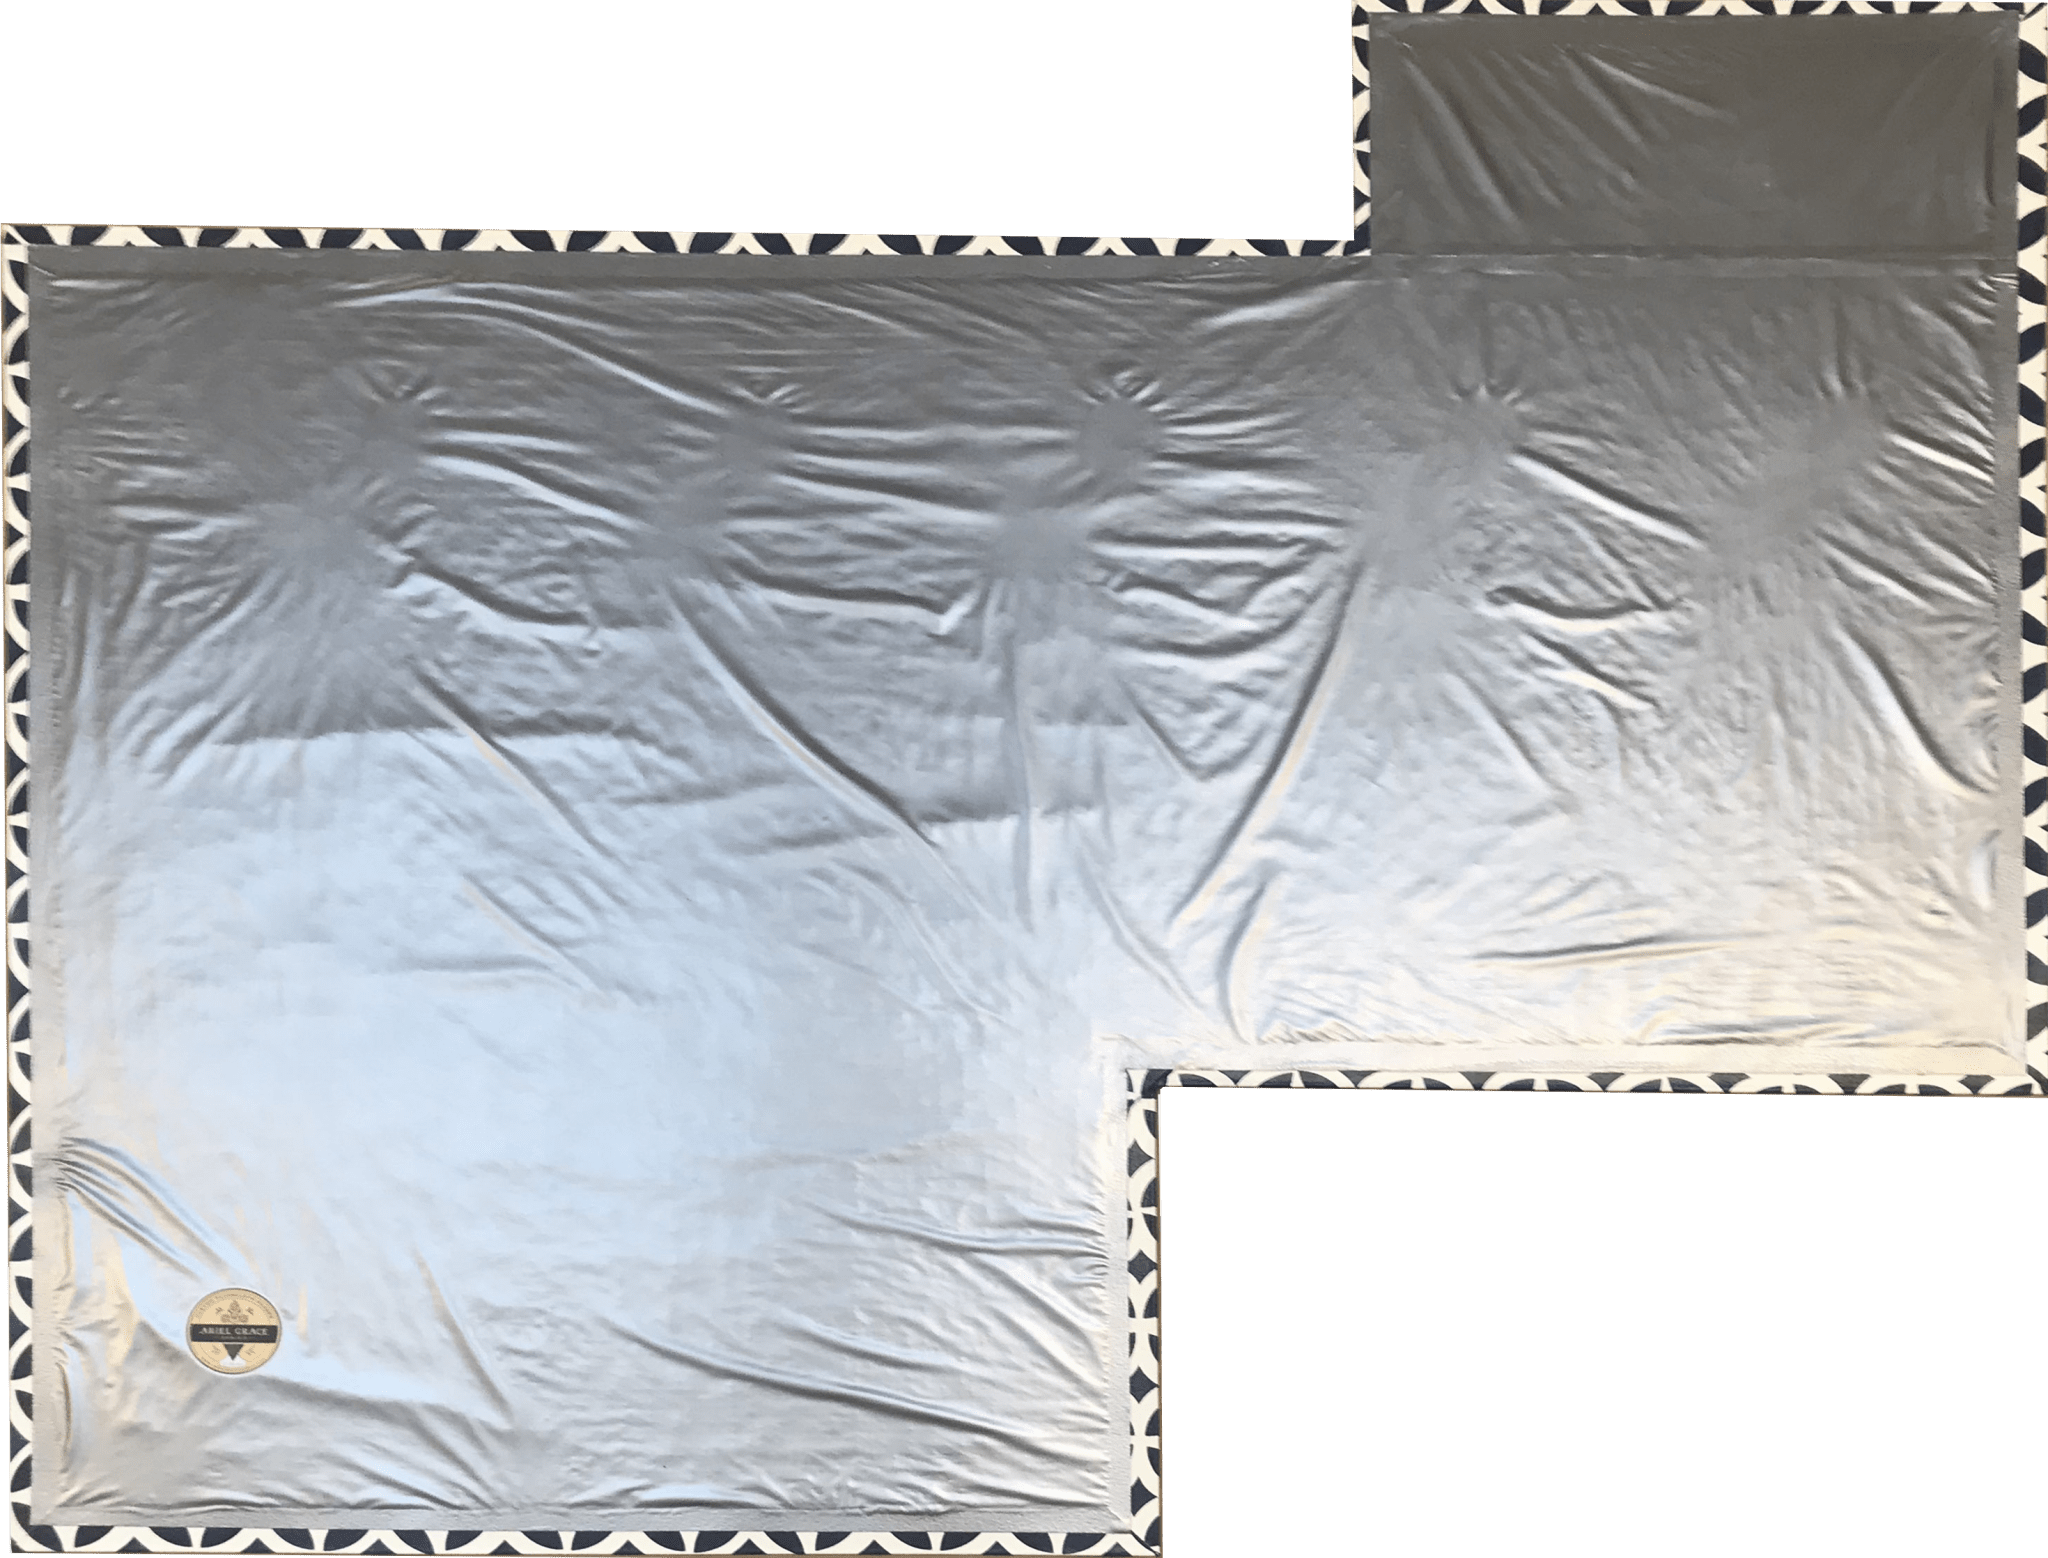 The backside of this floorcloth with has a two inch adhered hem. A layer of carpet padding has been adhered to the cove created by the hem, and waterproof fabric has been adhered to the hem.